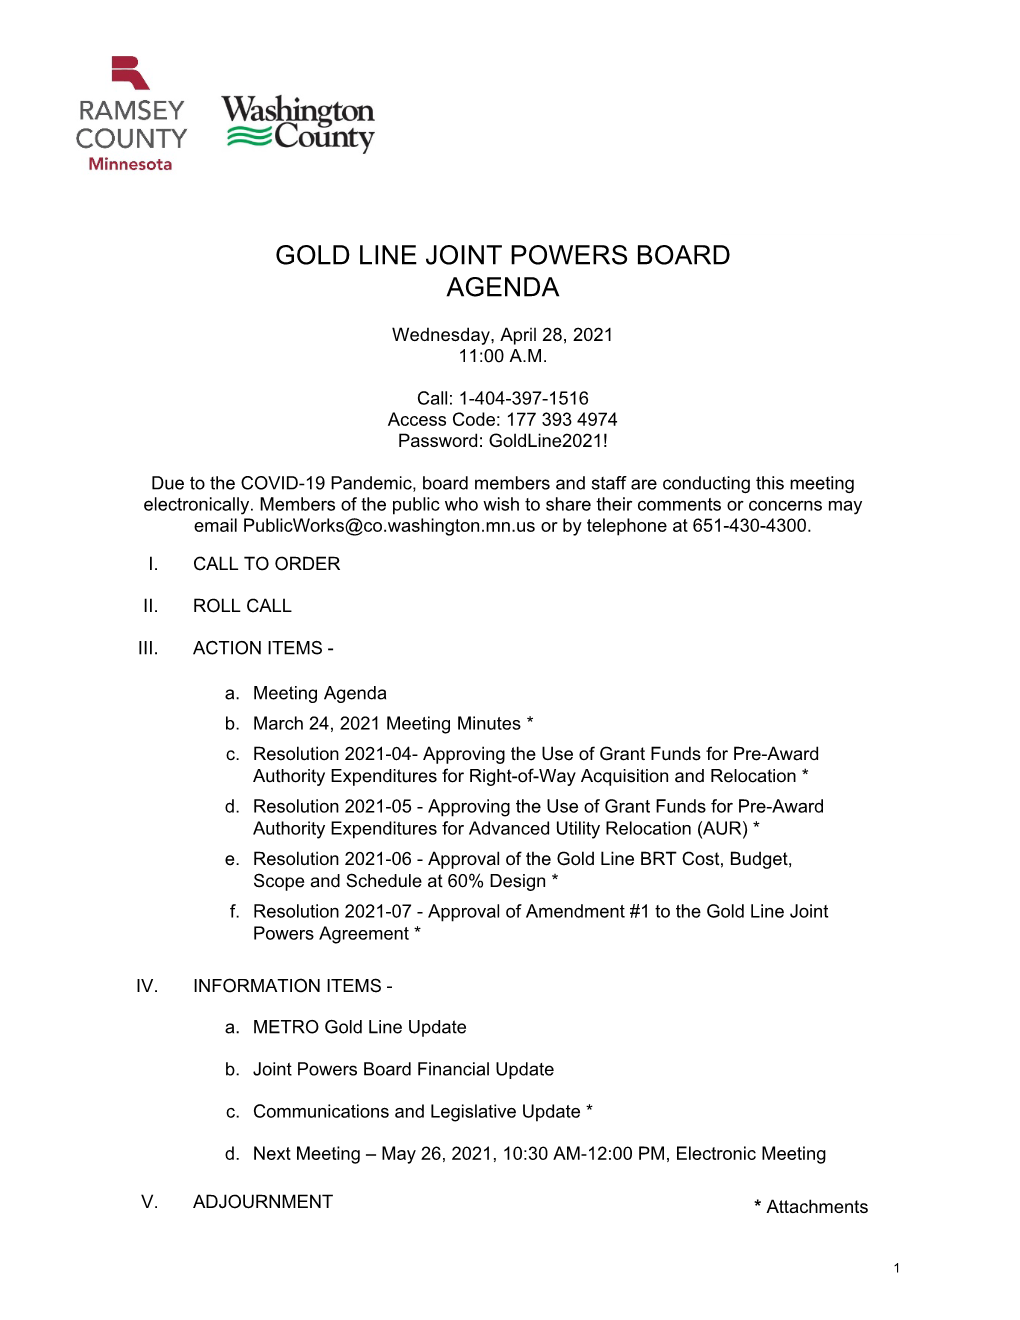 Gold Line Joint Powers Board Agenda